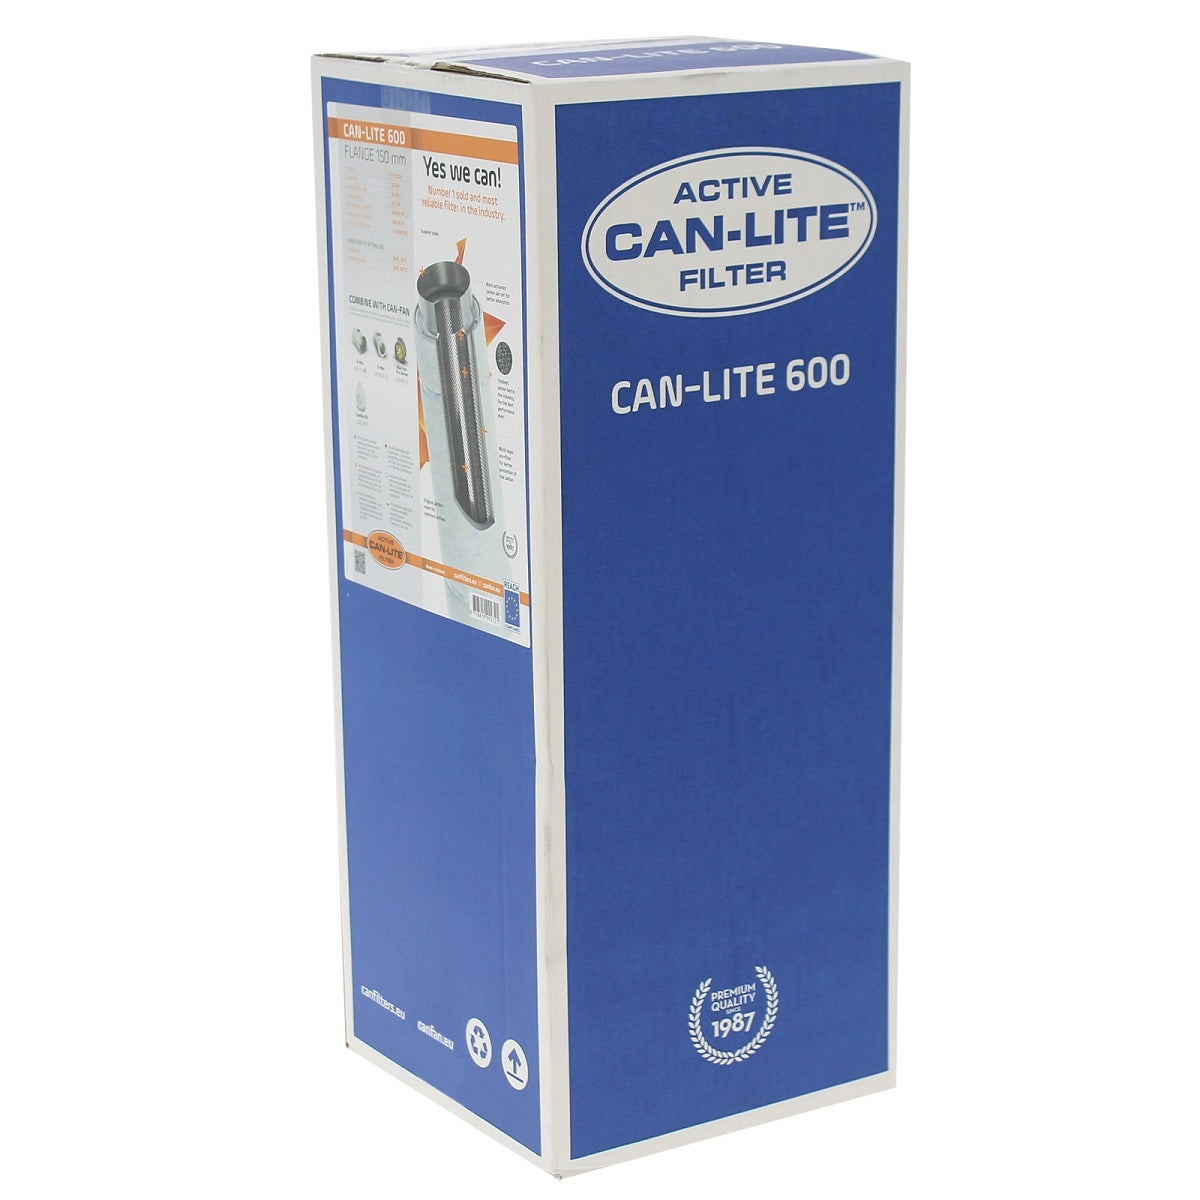 Can-Lite 600 - 160mm (600-660m3/h)